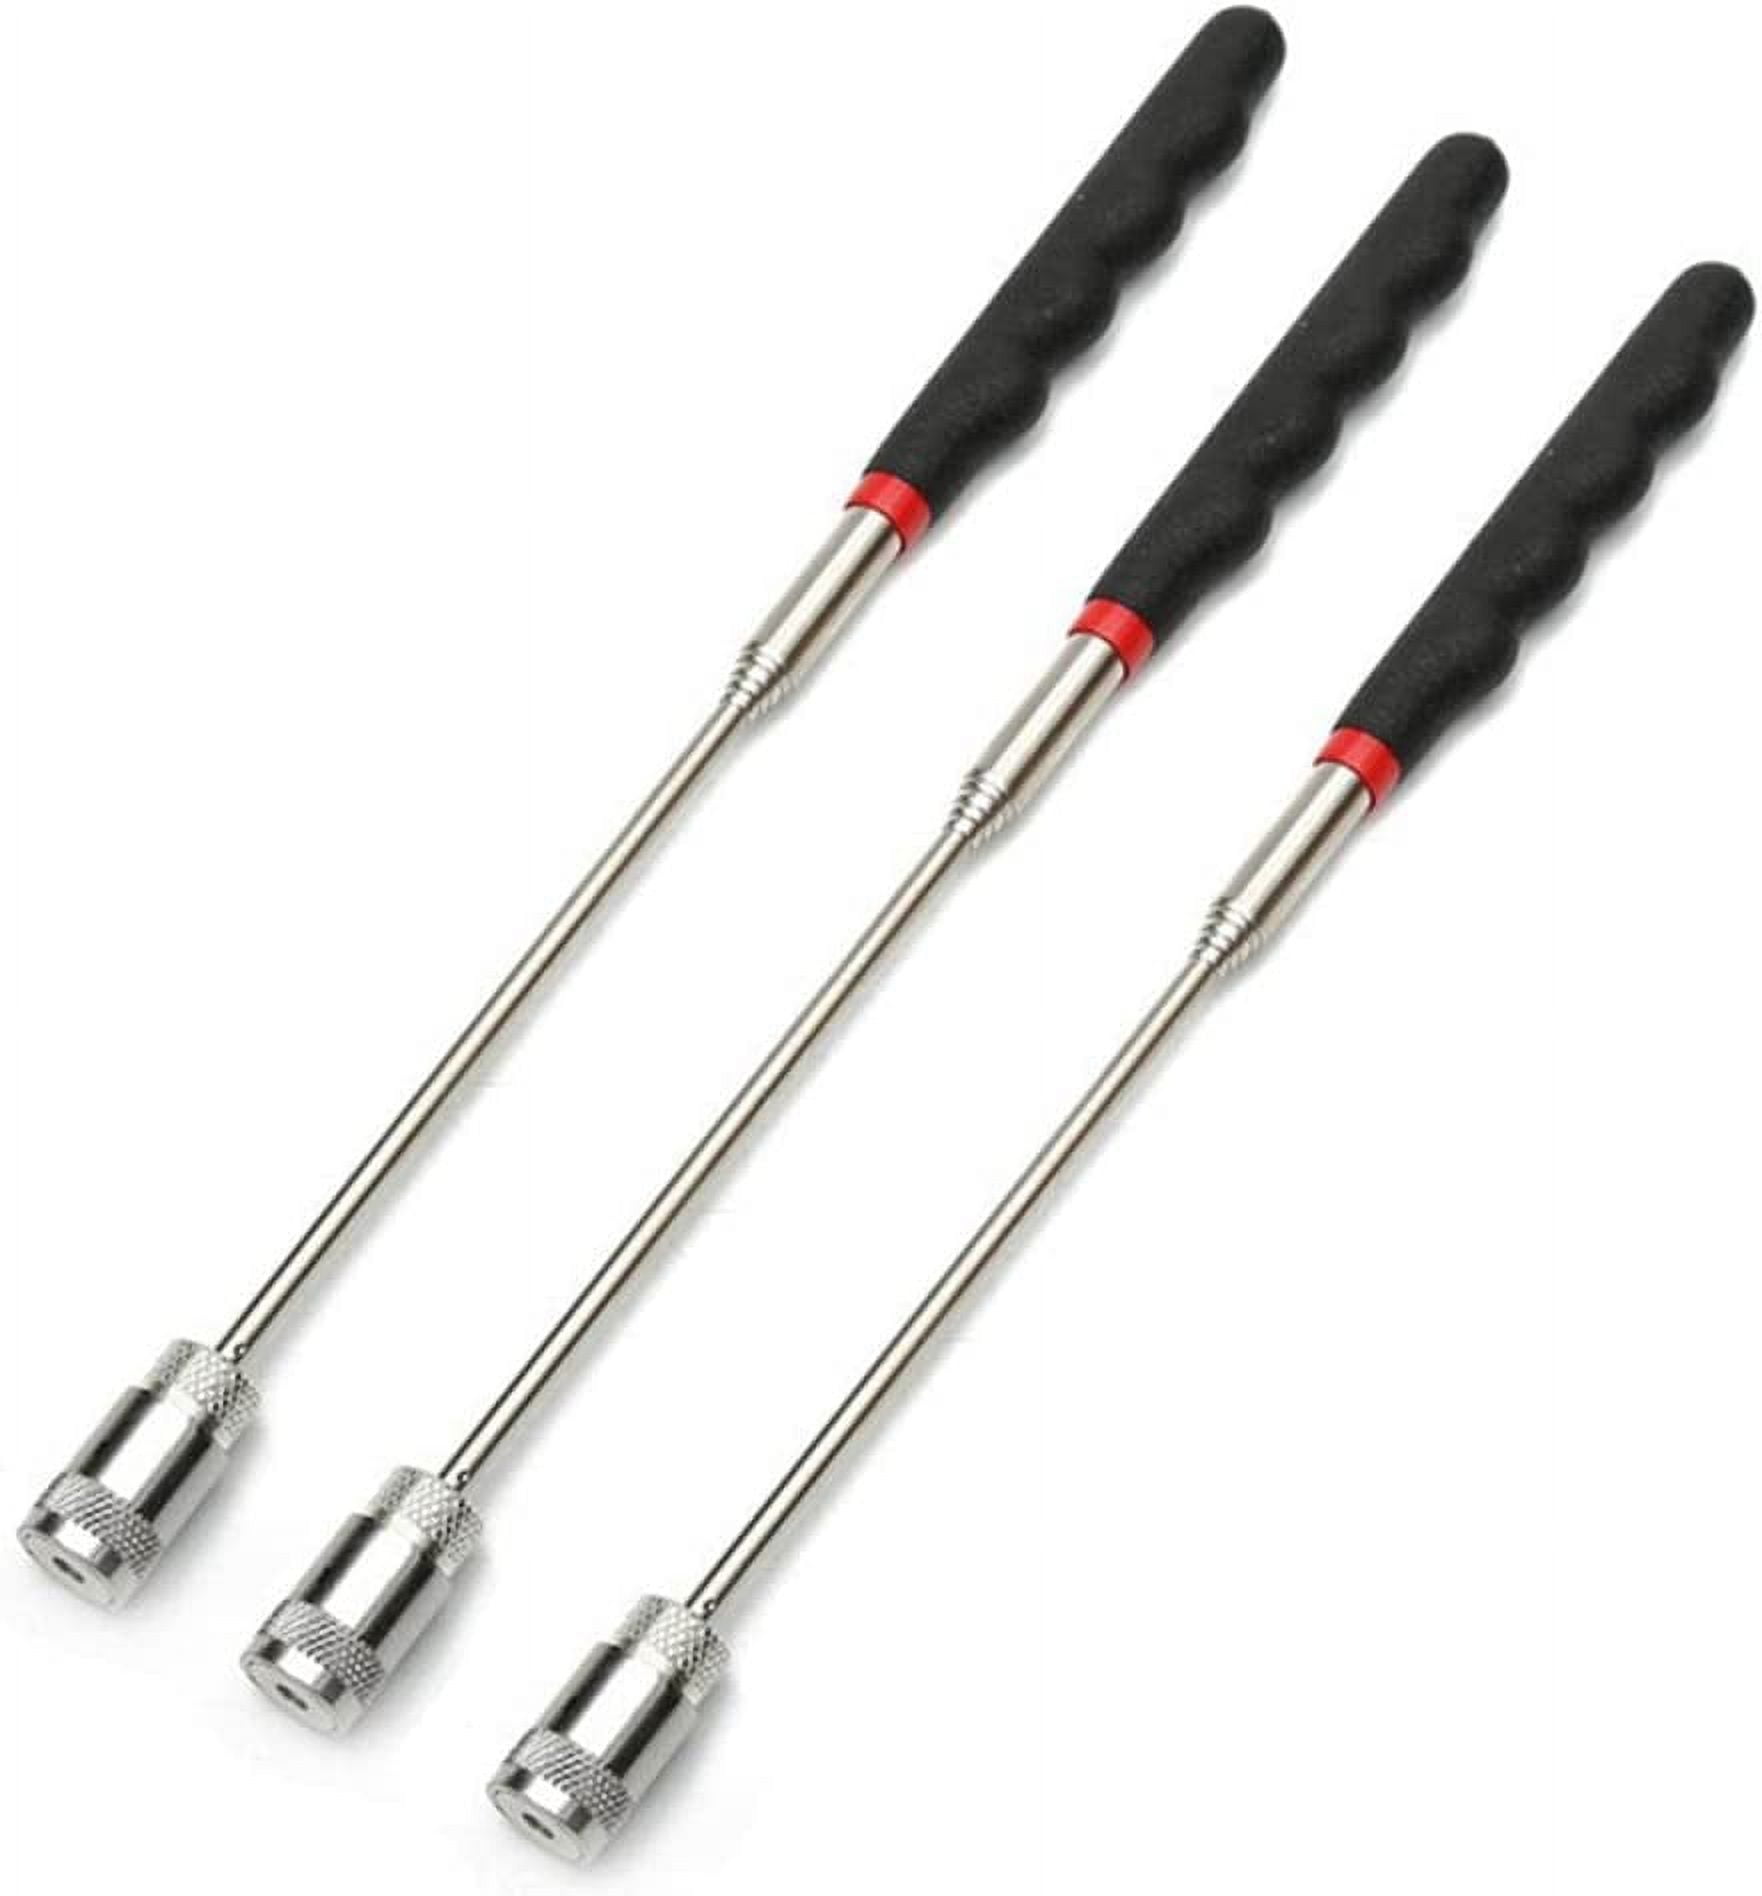 Magnetic Pickup Tool Telescopic Adjustable Magnetic Pick-Up Tool Grip  Extendable for Picking Up Magnet Nut Stick Tool Handy 